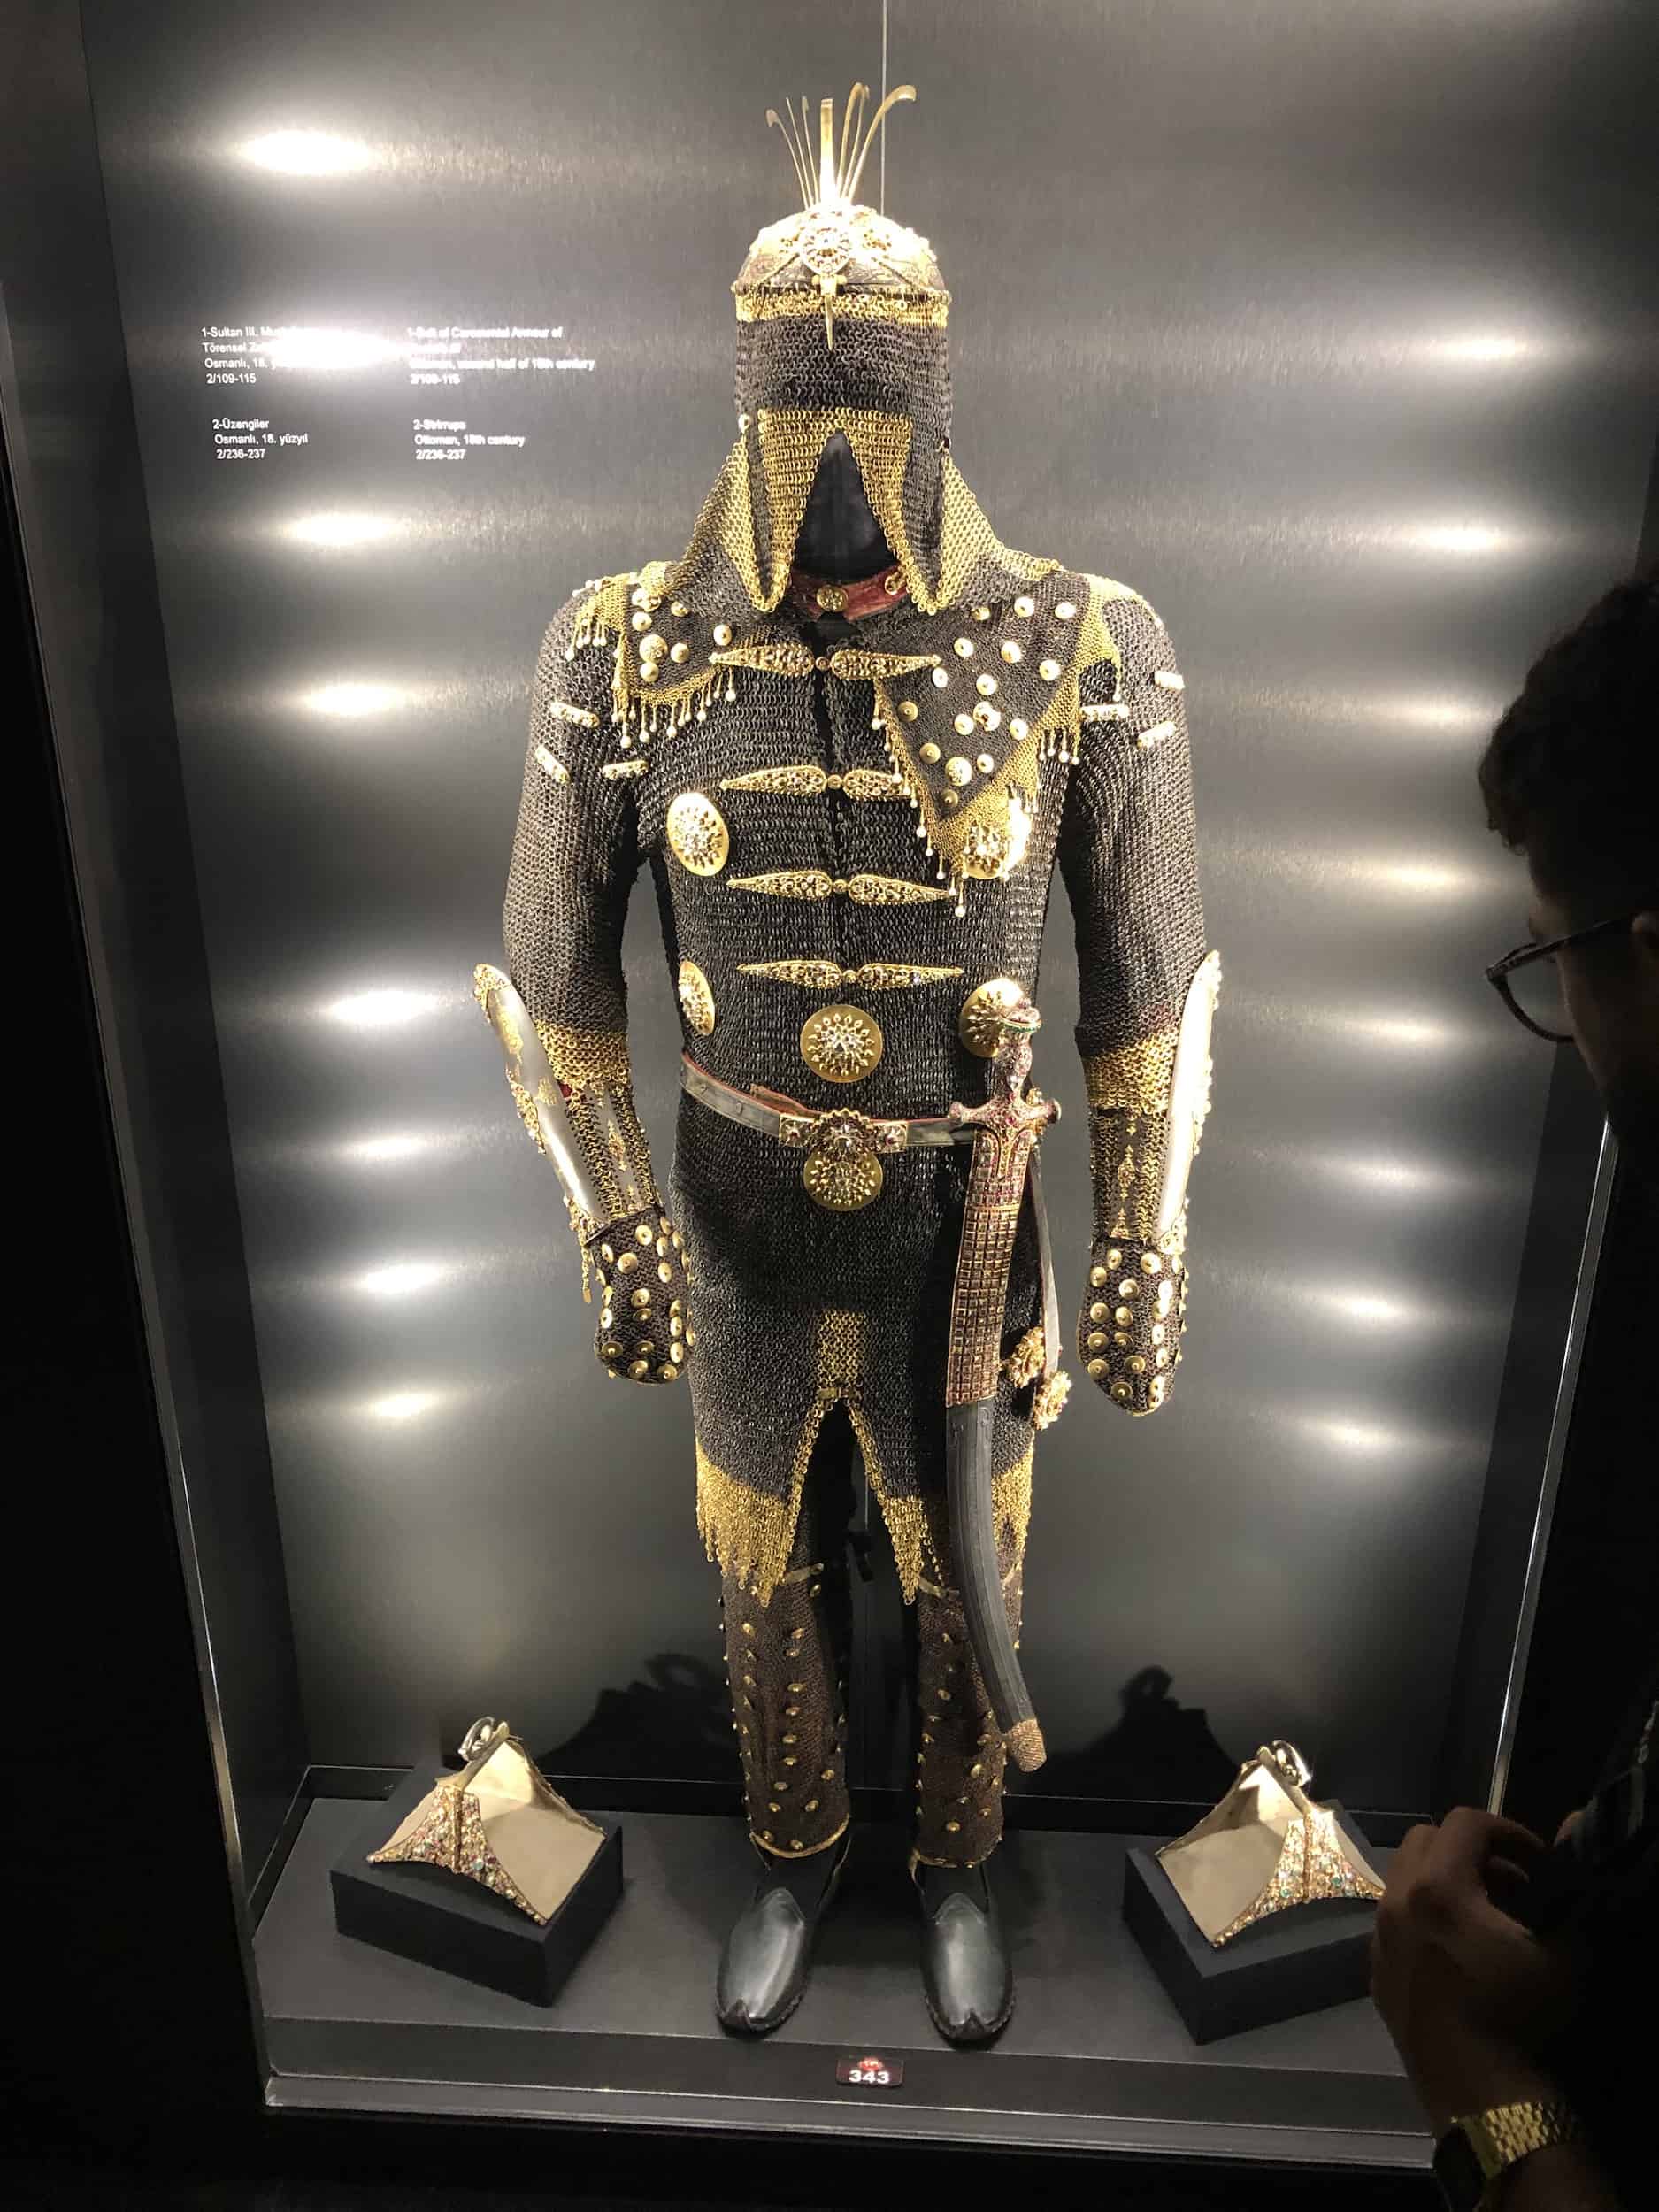 Ceremonial armor of Sultan Mustafa III; Ottoman; 18th century in the weapons collection at Topkapi Palace in Istanbul, Turkey